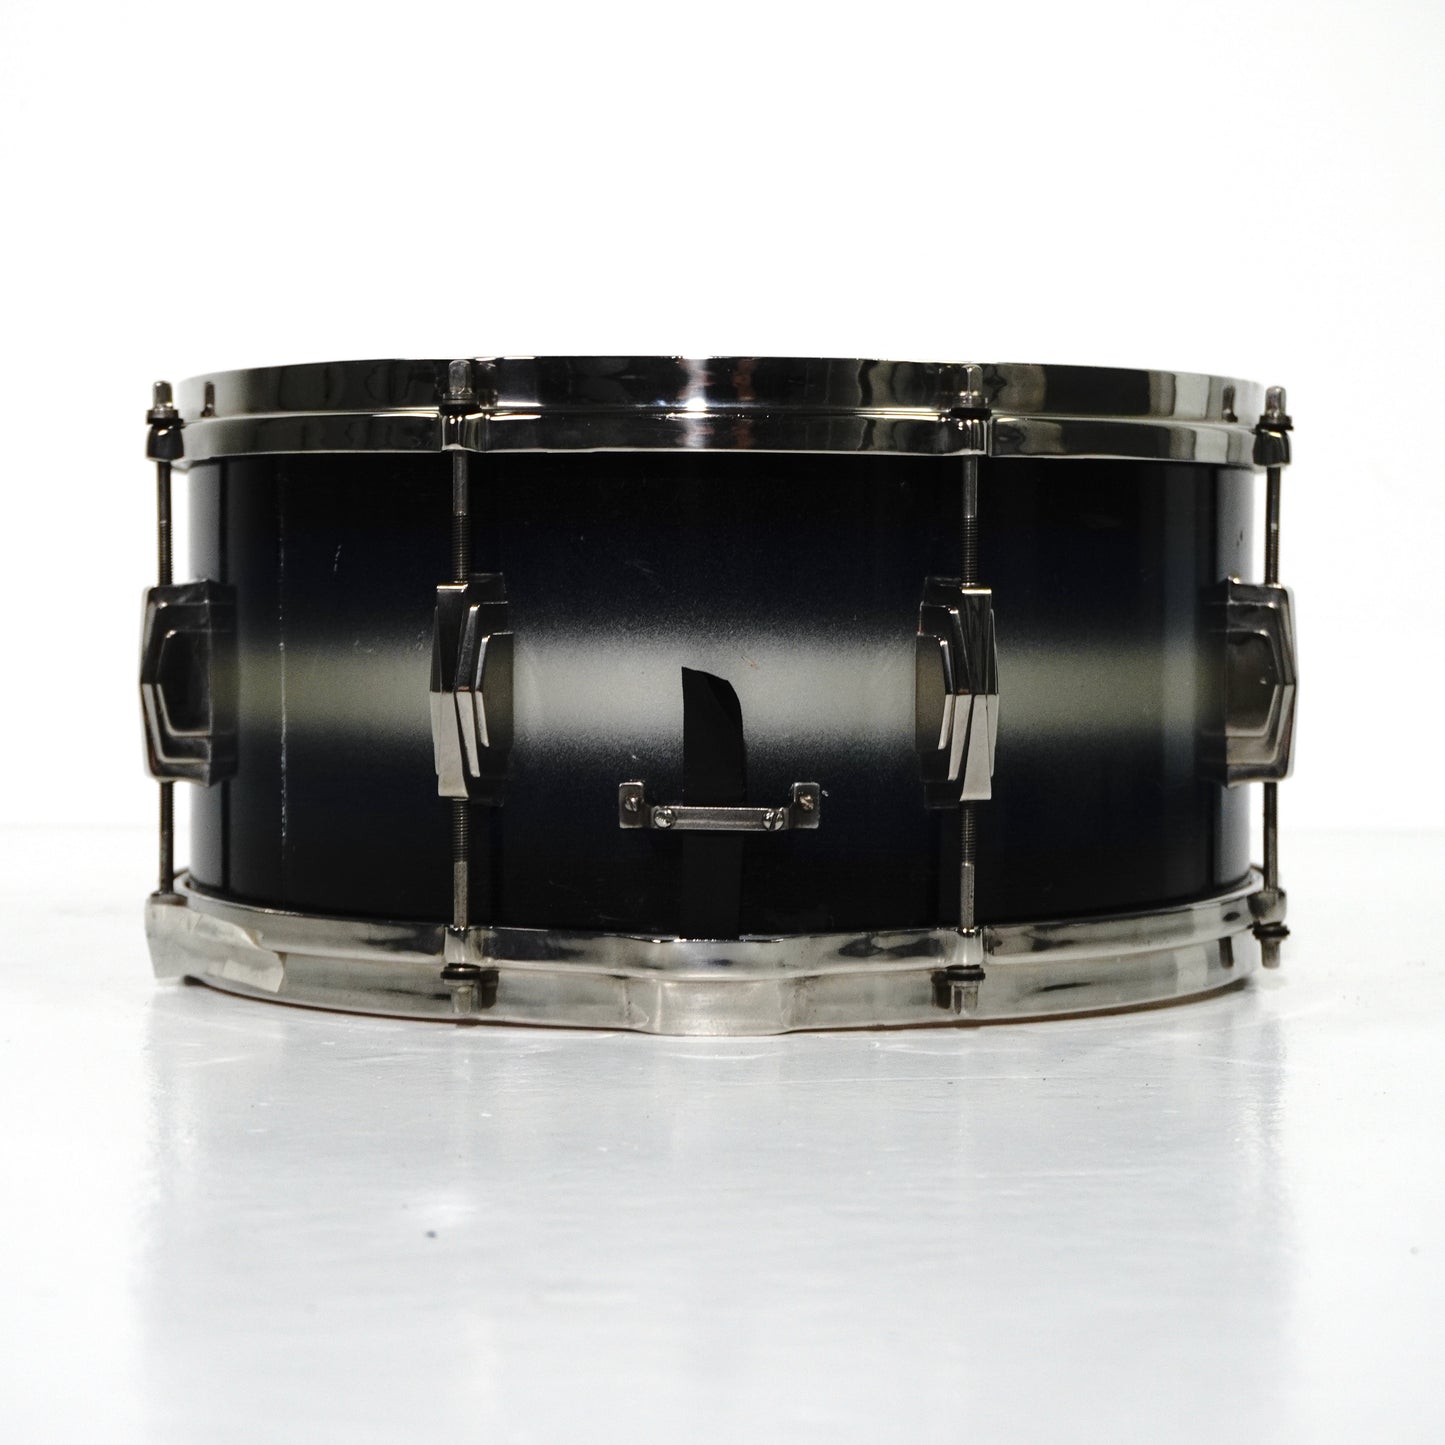 Ludwig and Leedy 14” x 6.5” Blue Silver Duco - Standard Drum 1942